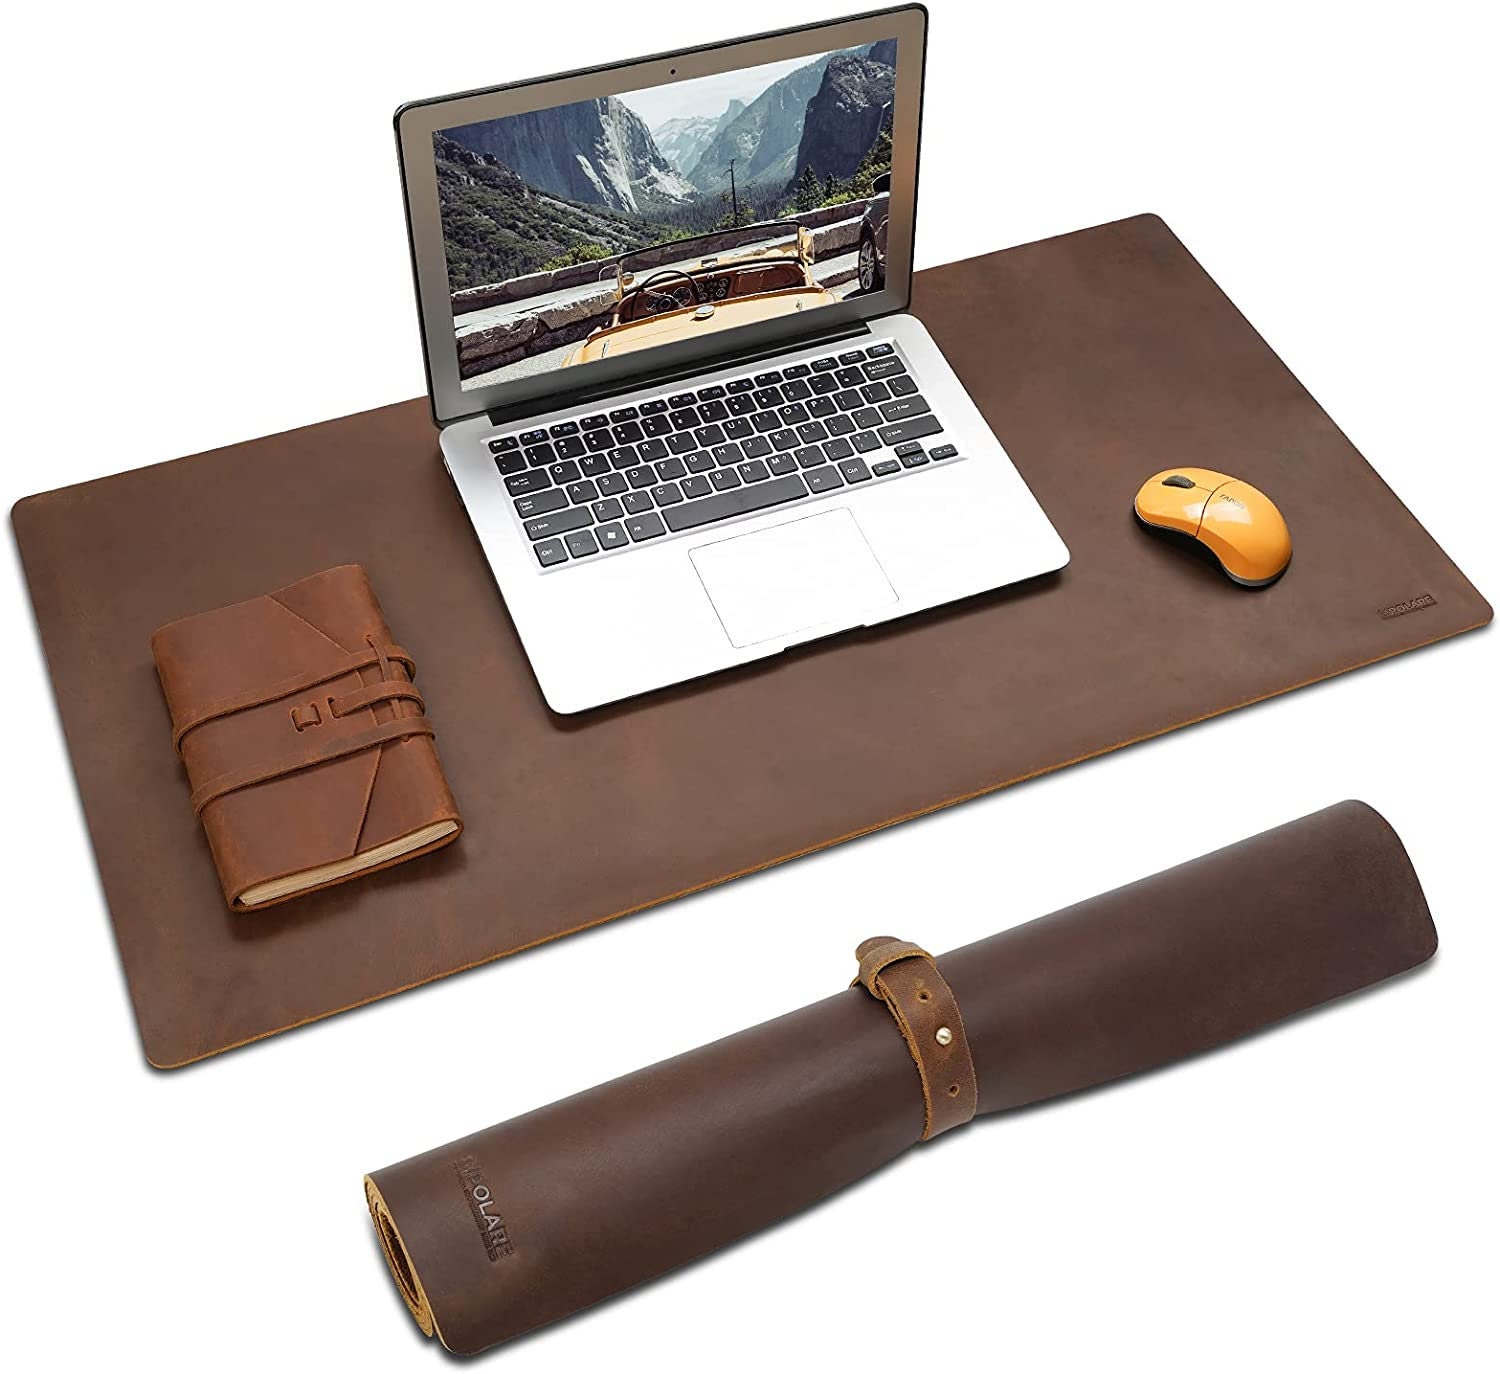 Leather Desk Pad / Table Placemats / Desk Mat / Table Protector